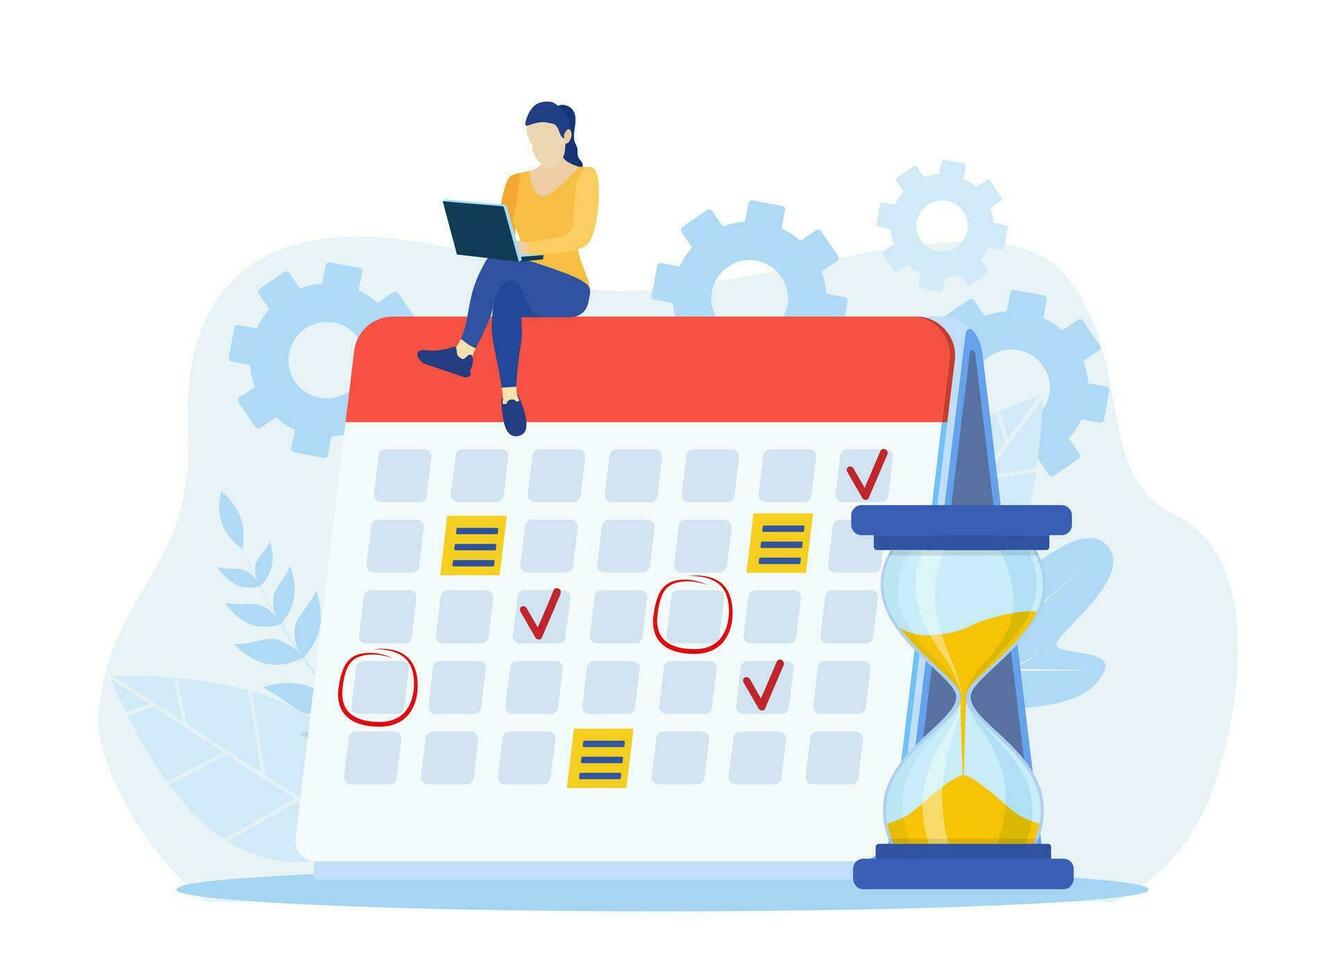 Planning schedule, business event and calendar concept. Project management, work time limit, task due dates, deadline reminder. Planning strategy and time management. Vector illustration in flat style